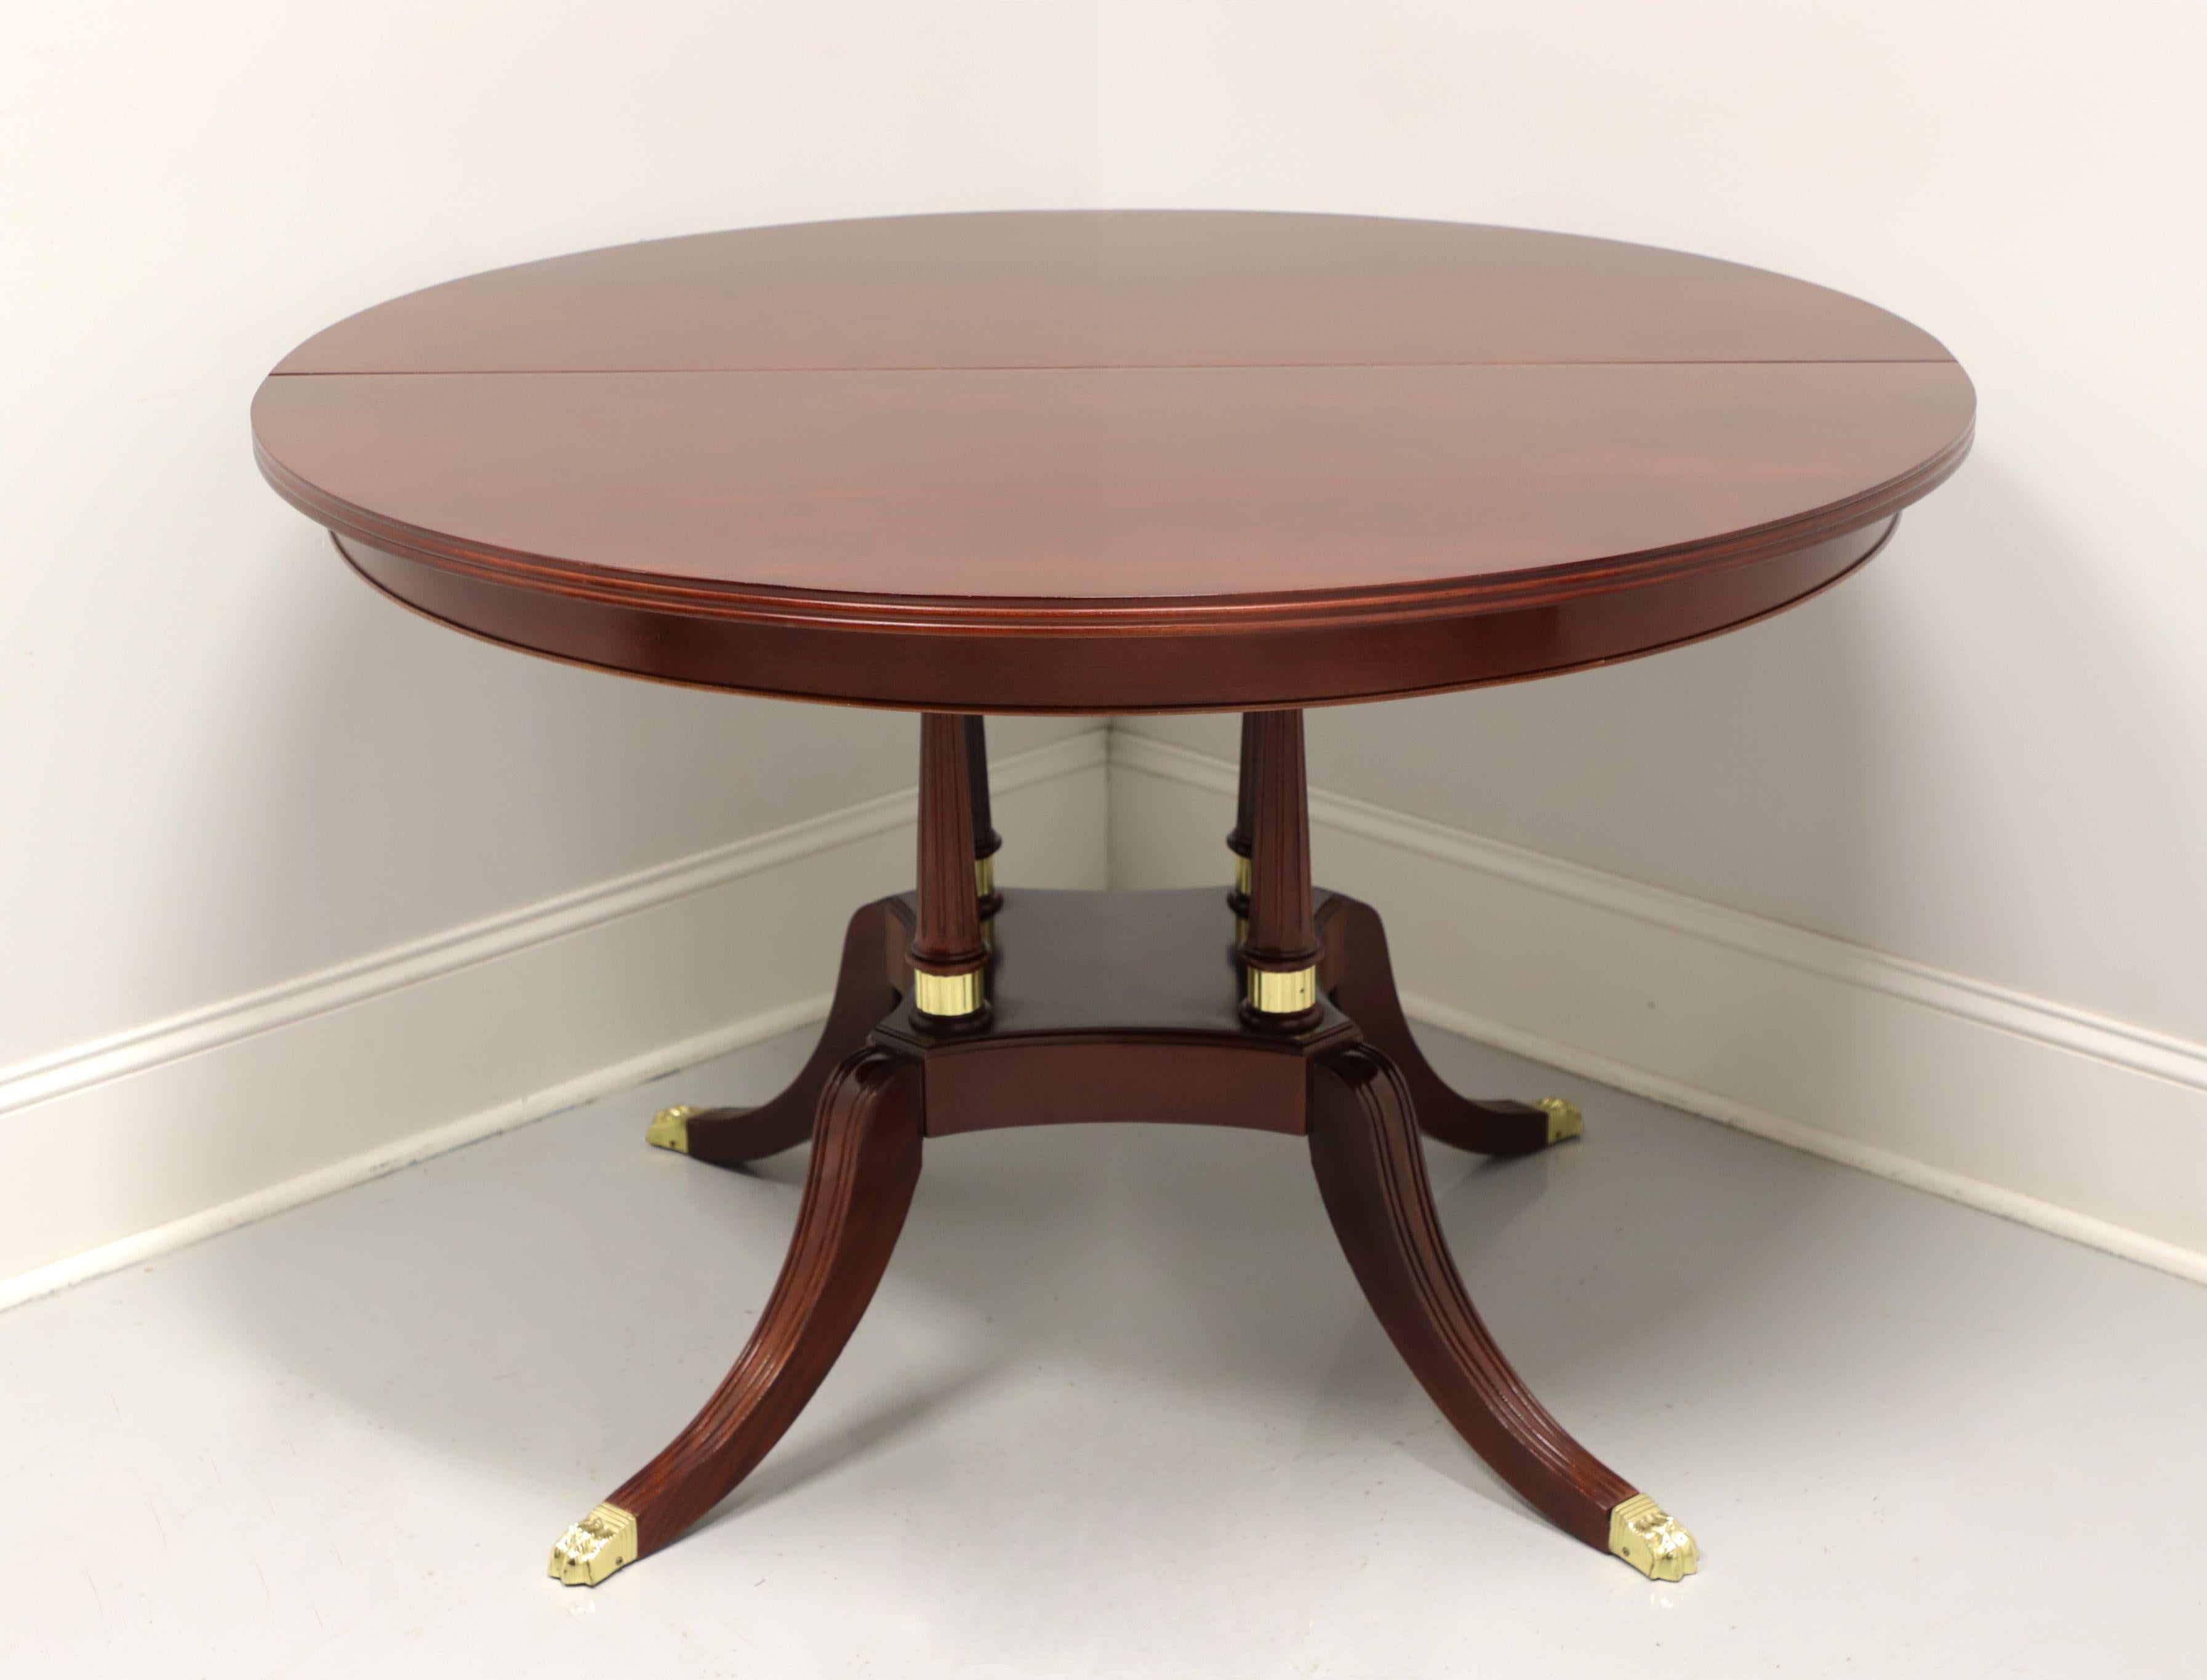 A Regency style dining table by Craftique. Solid mahogany, round to oval top (with leaf), birdcage pedestal with brass accents and four curved legs with brass paw toe caps. Wood expansion sliders with metal gears. Includes one extension leaf. Made